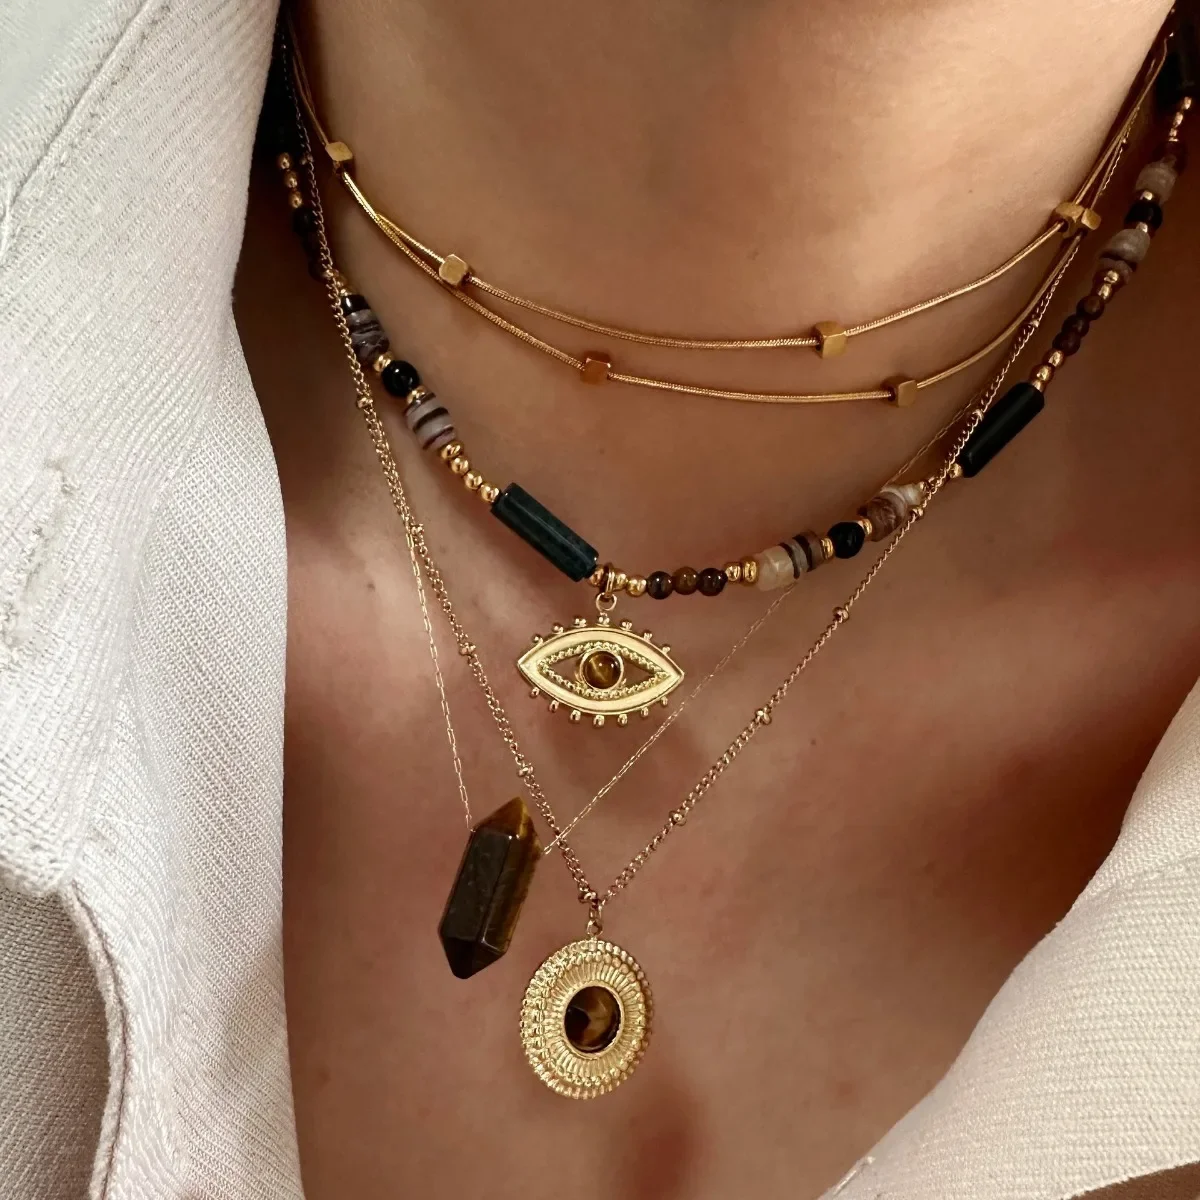 

Fashion Merad Wind Natural Stone Necklace Choker Stainless Steel Chain Devil's Eye Pendant for Women Vintage Jewelry Gift